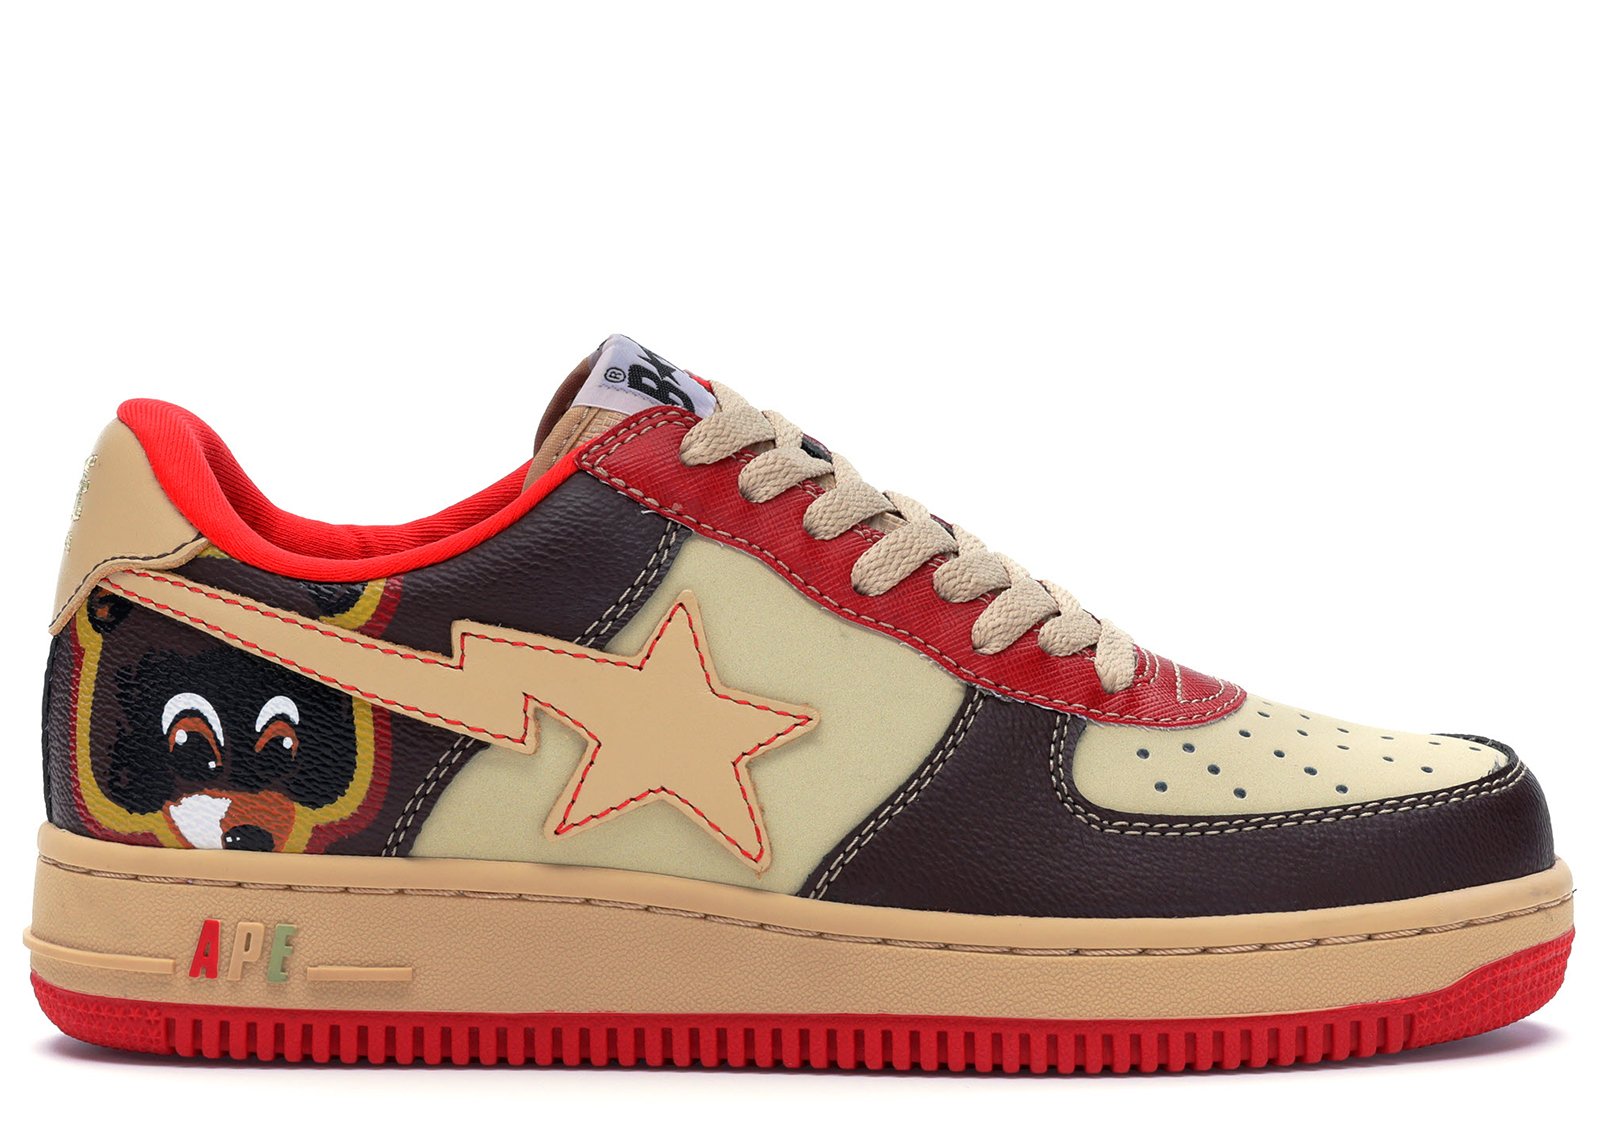 sneakers A Bathing Ape Bapesta Kanye West College Dropout